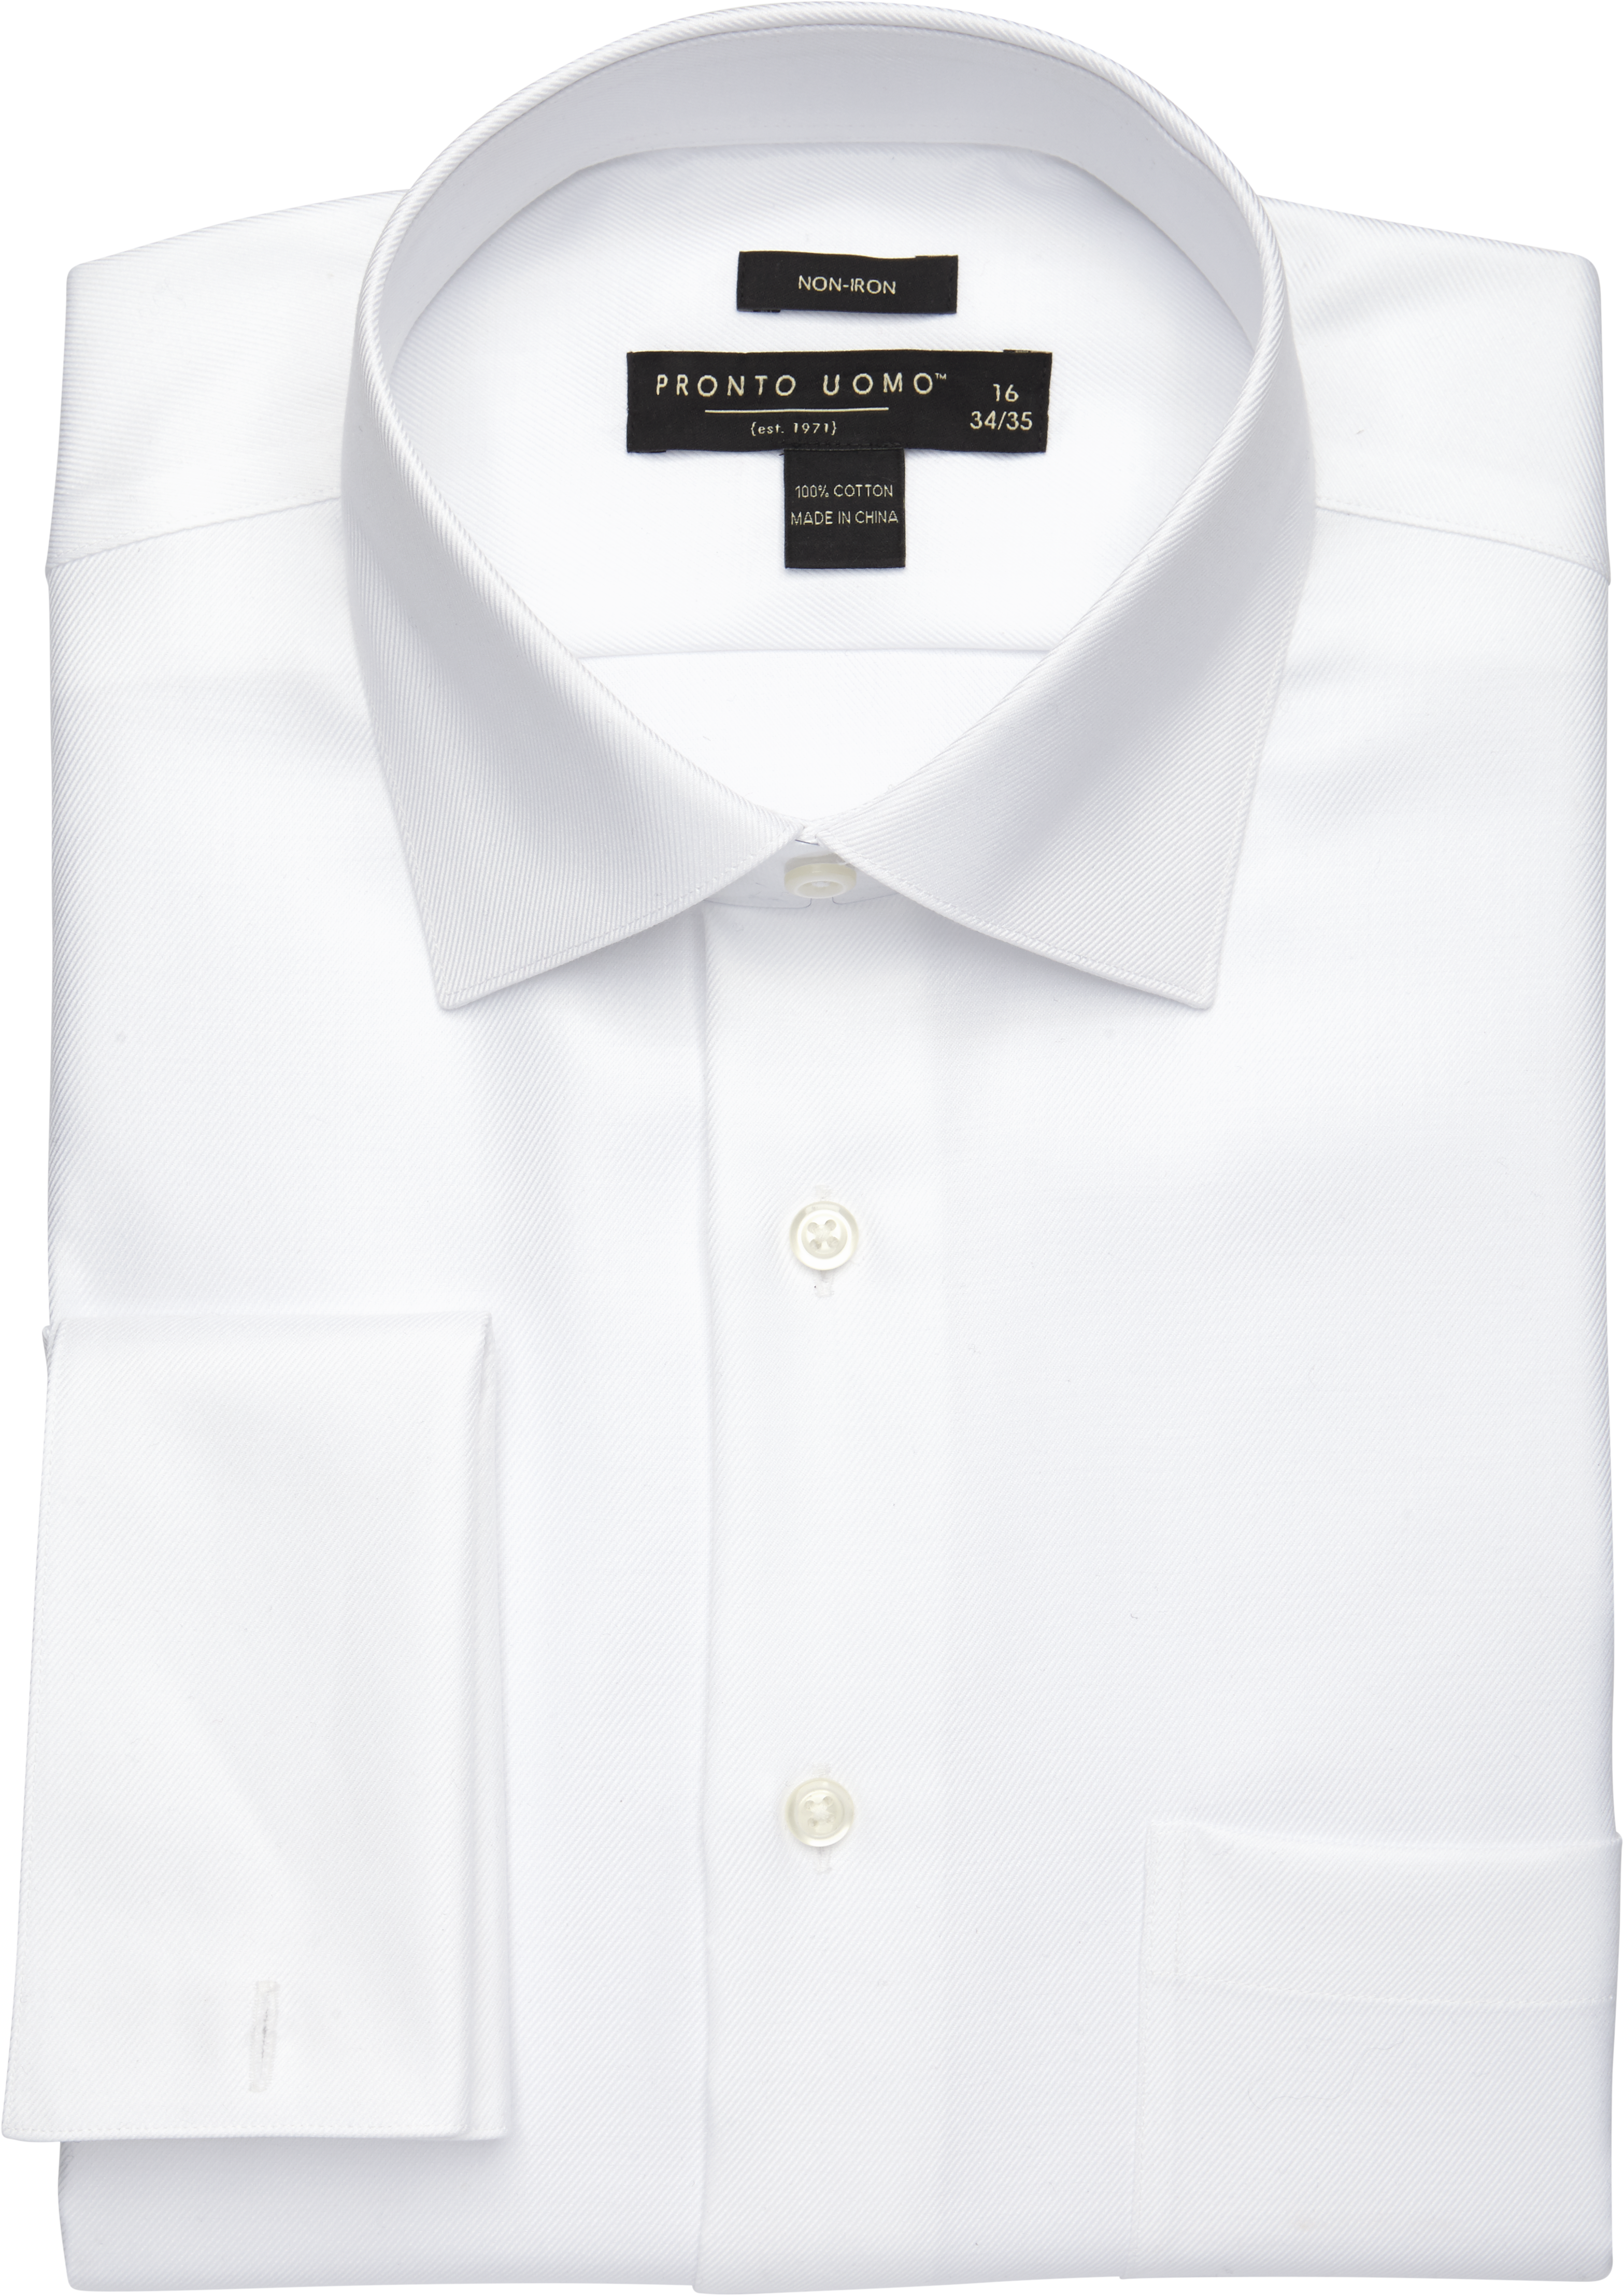 Pronto Uomo Modern Fit French Cuff Twill Dress Shirt, White - Men's  Featured | Men's Wearhouse